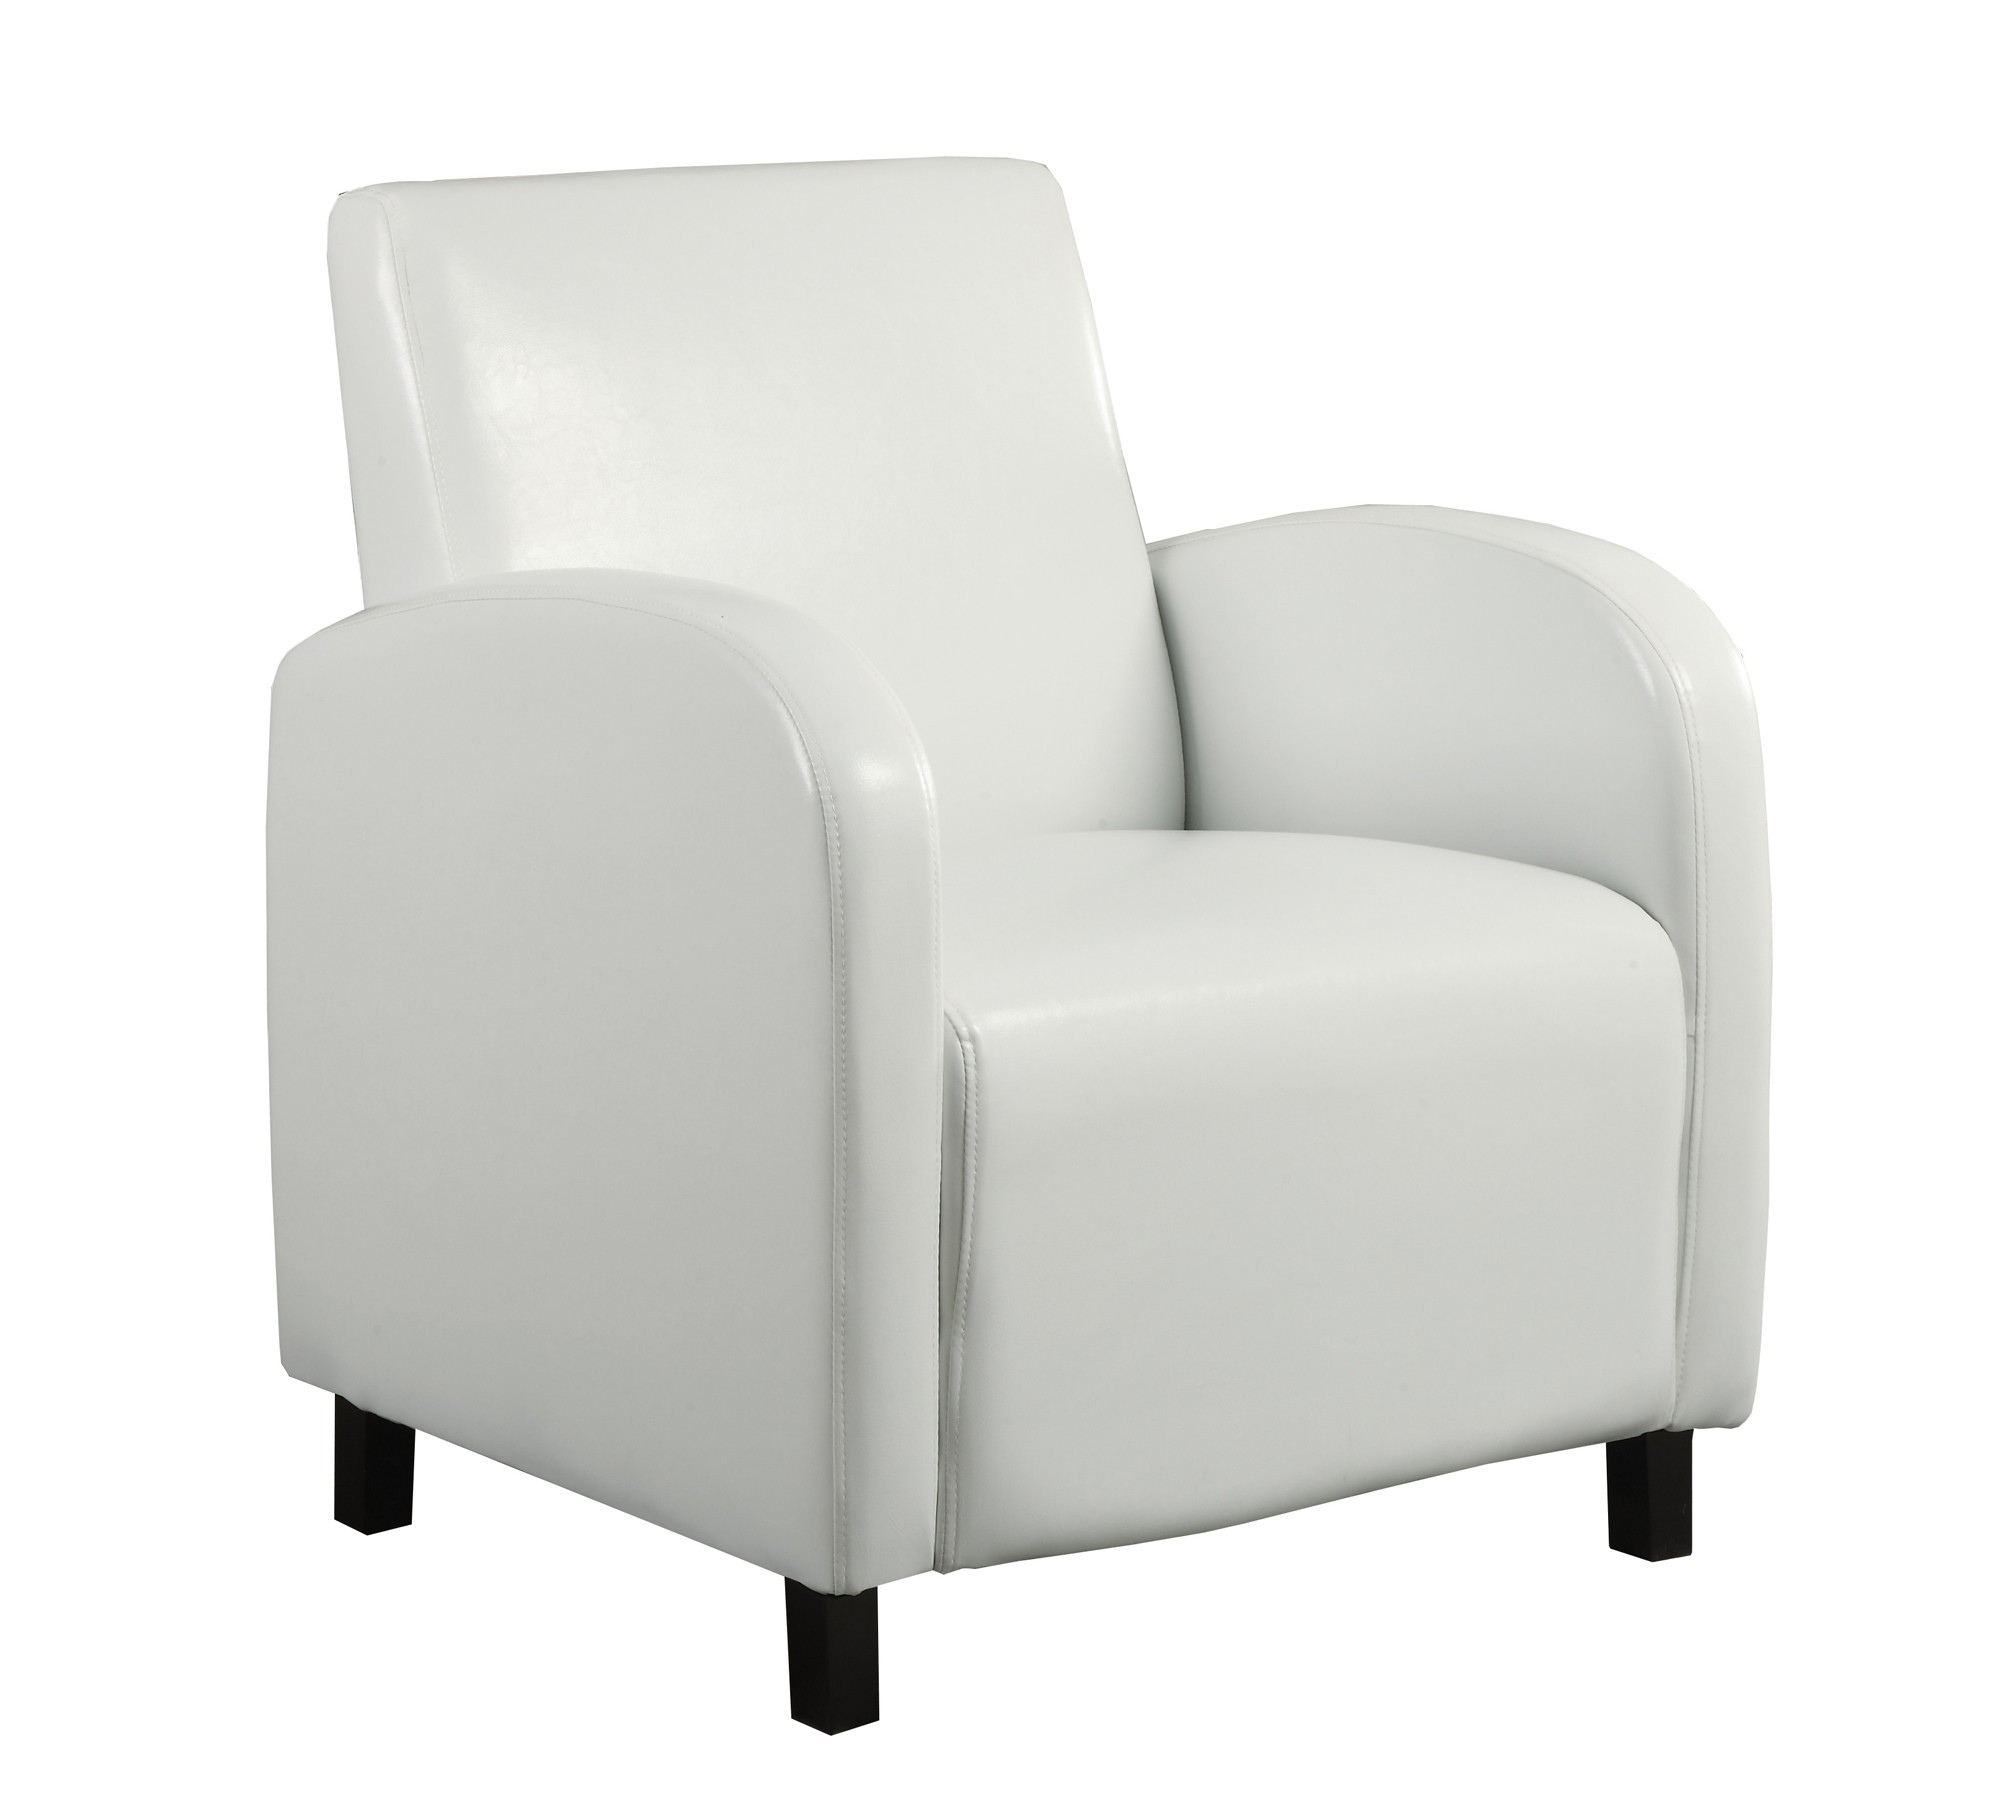 29" x 27.5" x 32.5" White Leather-Look Foam Accent Chair with Solid Wood Frame